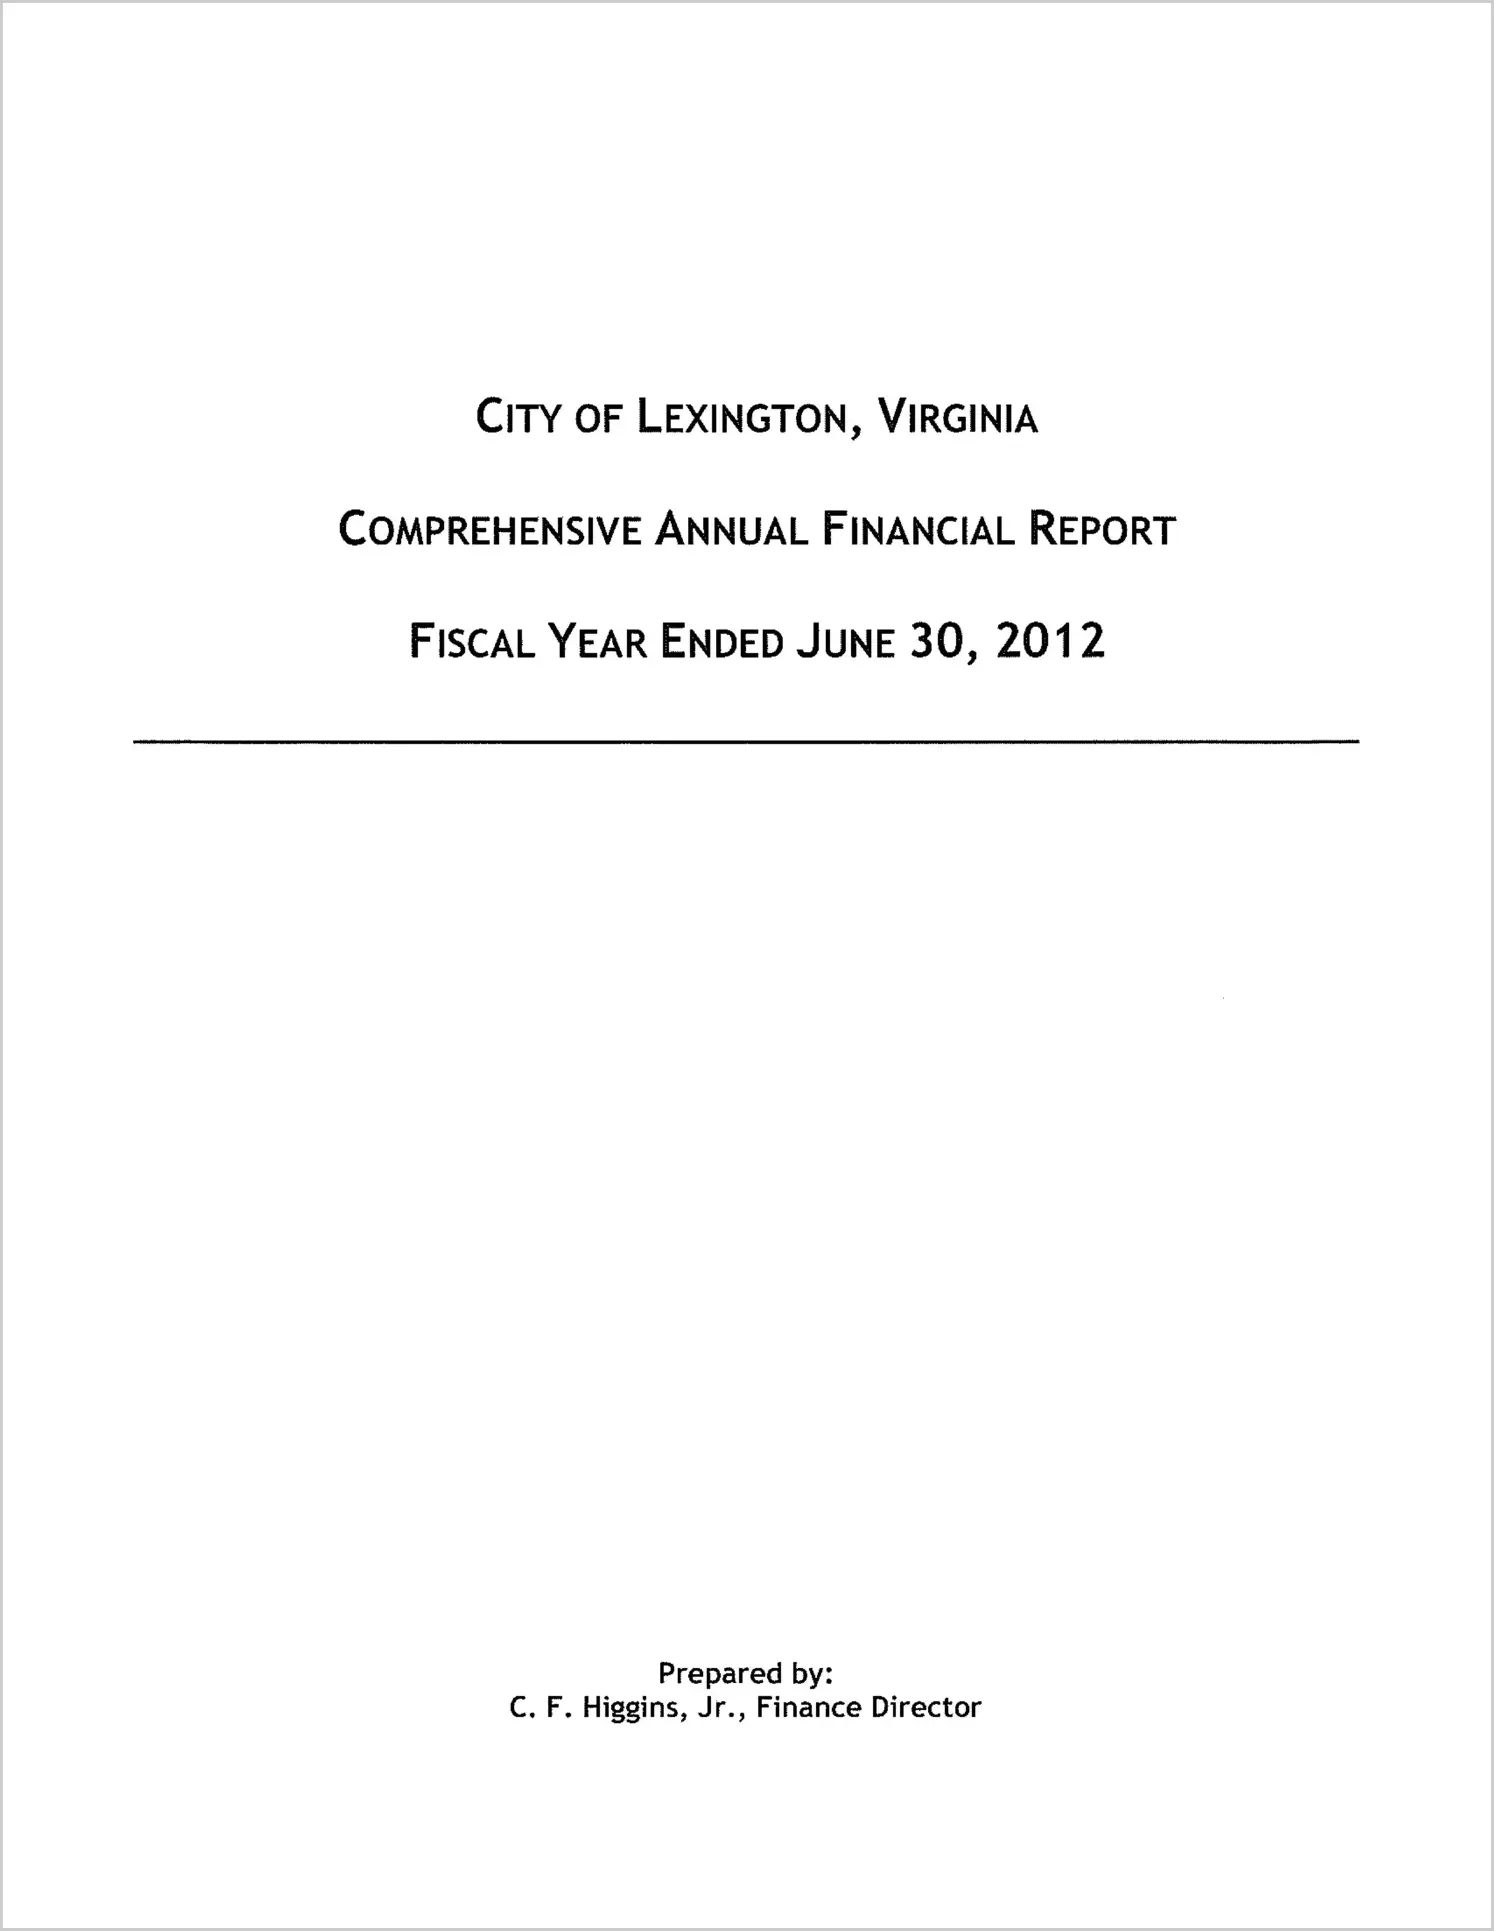 2012 Annual Financial Report for City of Lexington